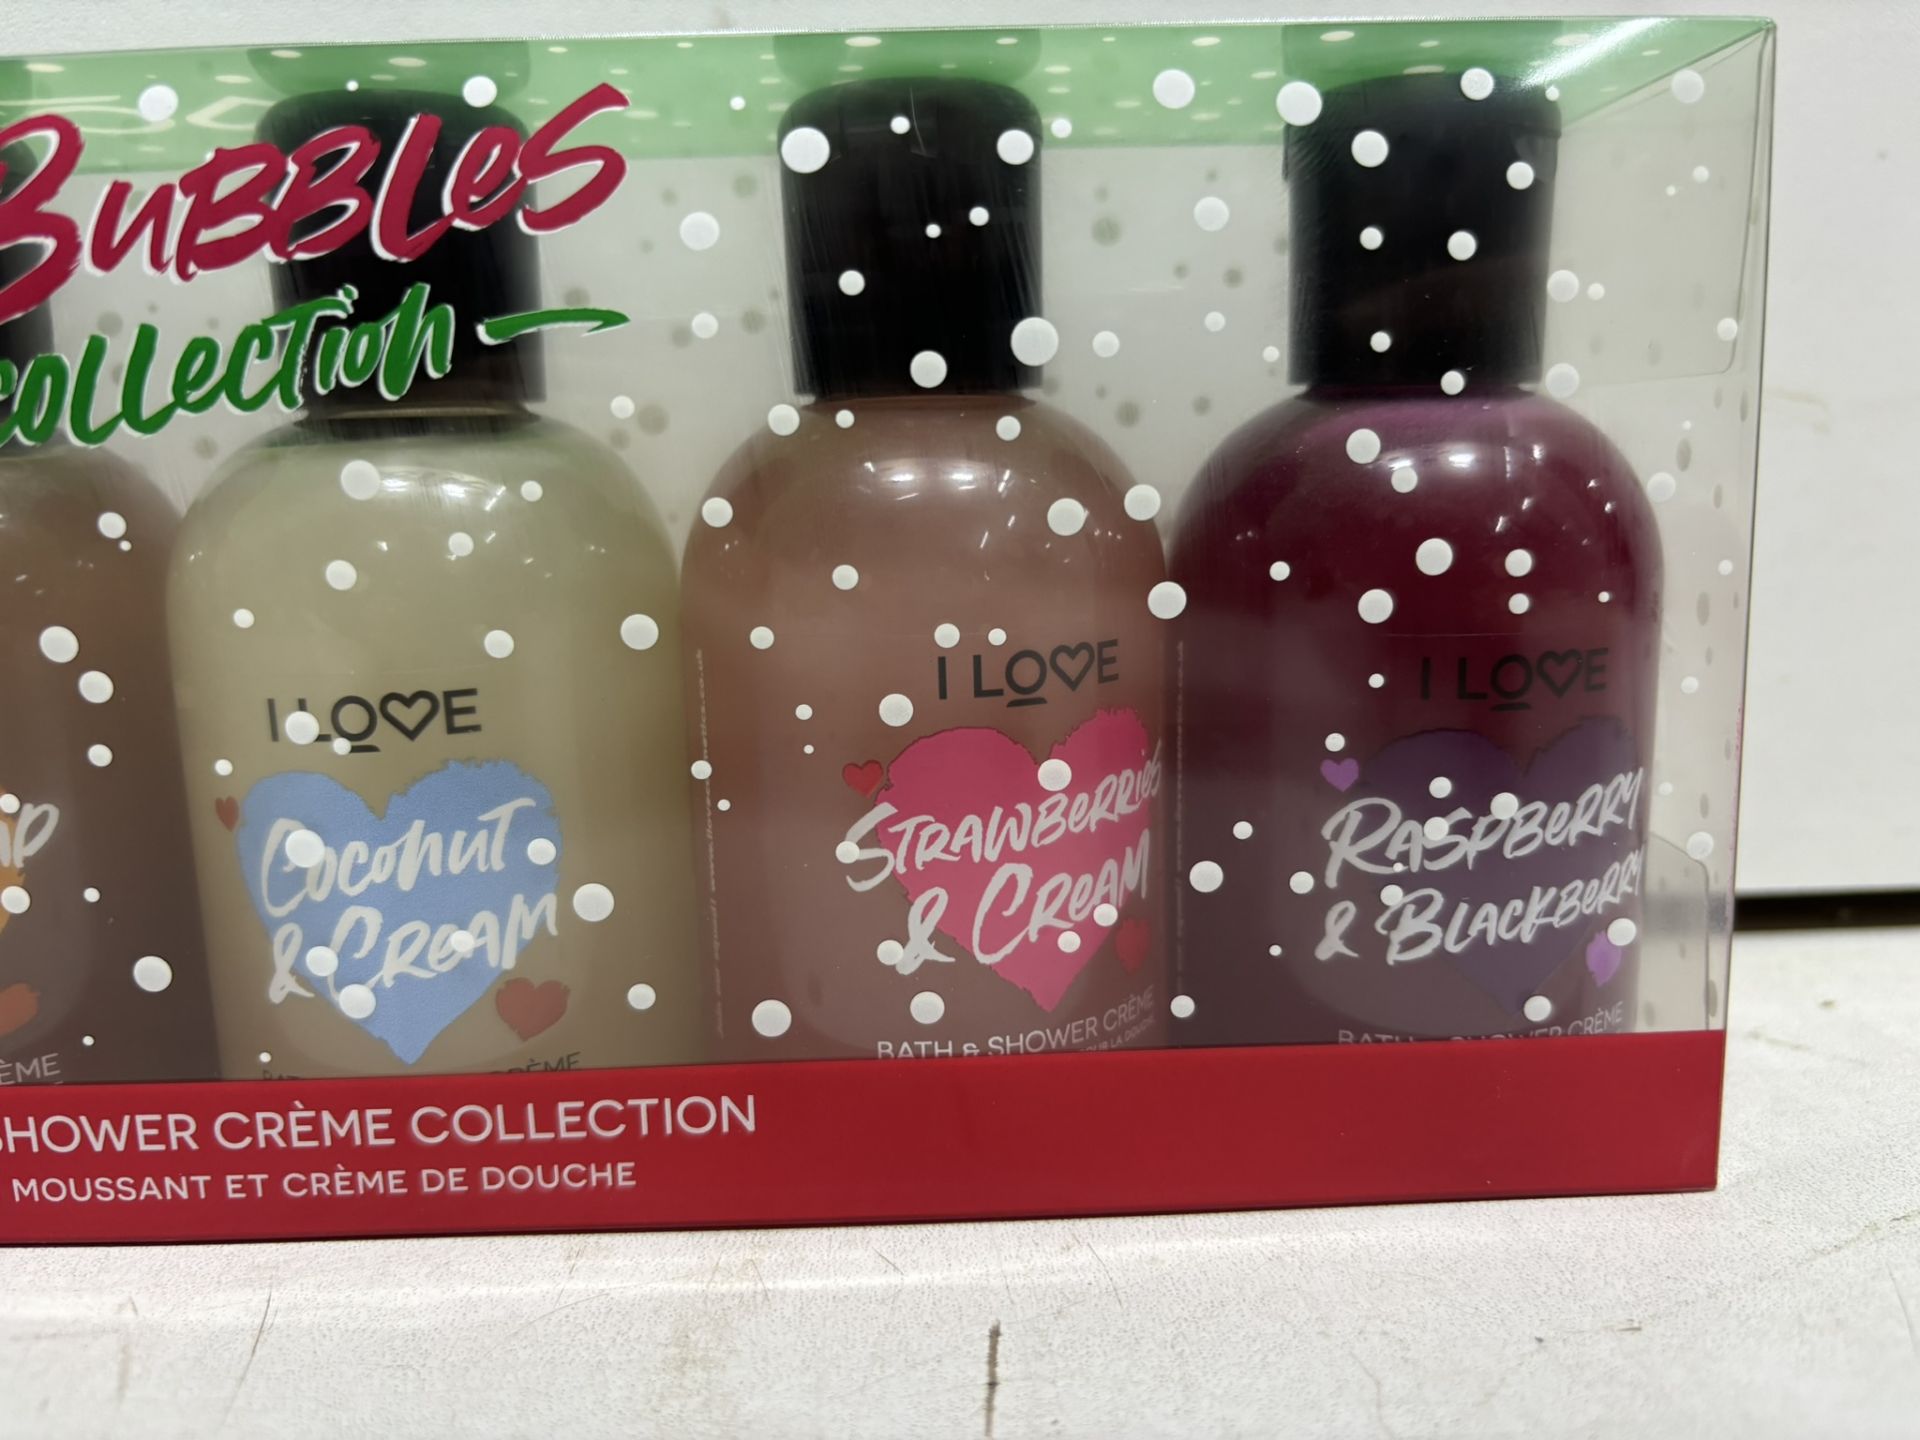 12 x I Love Cosmetics Lots of Bubbles Bath & Shower Creme Festive Collection Gift Sets - Image 3 of 10